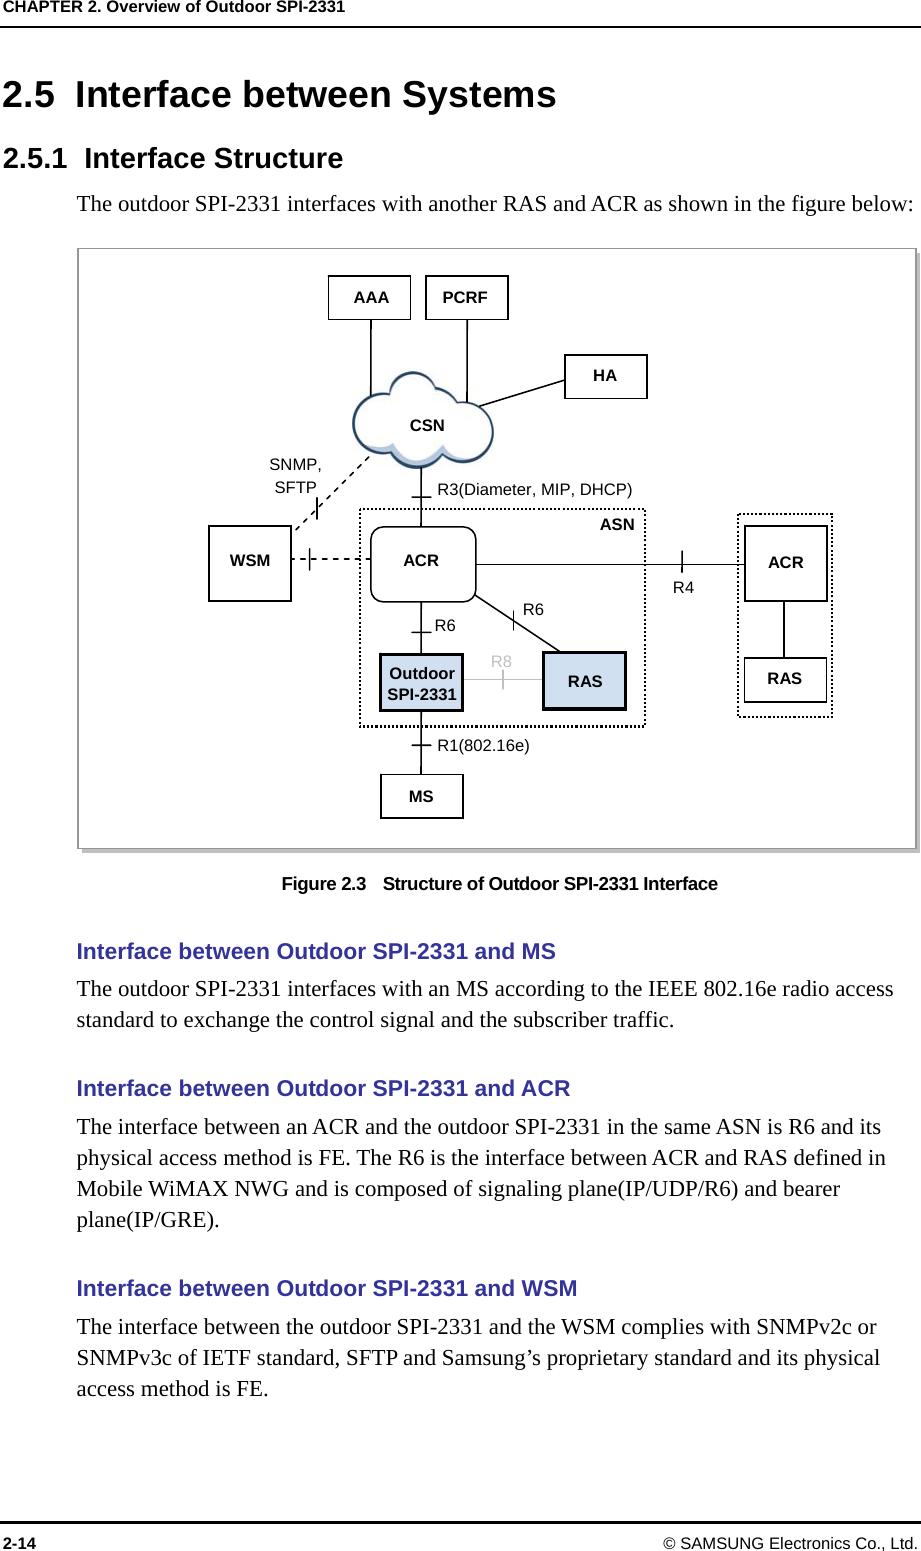 CHAPTER 2. Overview of Outdoor SPI-2331 2-14 © SAMSUNG Electronics Co., Ltd. 2.5 Interface between Systems  2.5.1 Interface Structure The outdoor SPI-2331 interfaces with another RAS and ACR as shown in the figure below:  Figure 2.3    Structure of Outdoor SPI-2331 Interface  Interface between Outdoor SPI-2331 and MS   The outdoor SPI-2331 interfaces with an MS according to the IEEE 802.16e radio access standard to exchange the control signal and the subscriber traffic.  Interface between Outdoor SPI-2331 and ACR The interface between an ACR and the outdoor SPI-2331 in the same ASN is R6 and its physical access method is FE. The R6 is the interface between ACR and RAS defined in Mobile WiMAX NWG and is composed of signaling plane(IP/UDP/R6) and bearer plane(IP/GRE).  Interface between Outdoor SPI-2331 and WSM   The interface between the outdoor SPI-2331 and the WSM complies with SNMPv2c or SNMPv3c of IETF standard, SFTP and Samsung’s proprietary standard and its physical access method is FE. CSN AAA ACR R3(Diameter, MIP, DHCP) R6 R1(802.16e) R4 SNMP, SFTP PCRF MS WSM HA Outdoor SPI-2331 RASR6 R8 ACR RAS ASN 